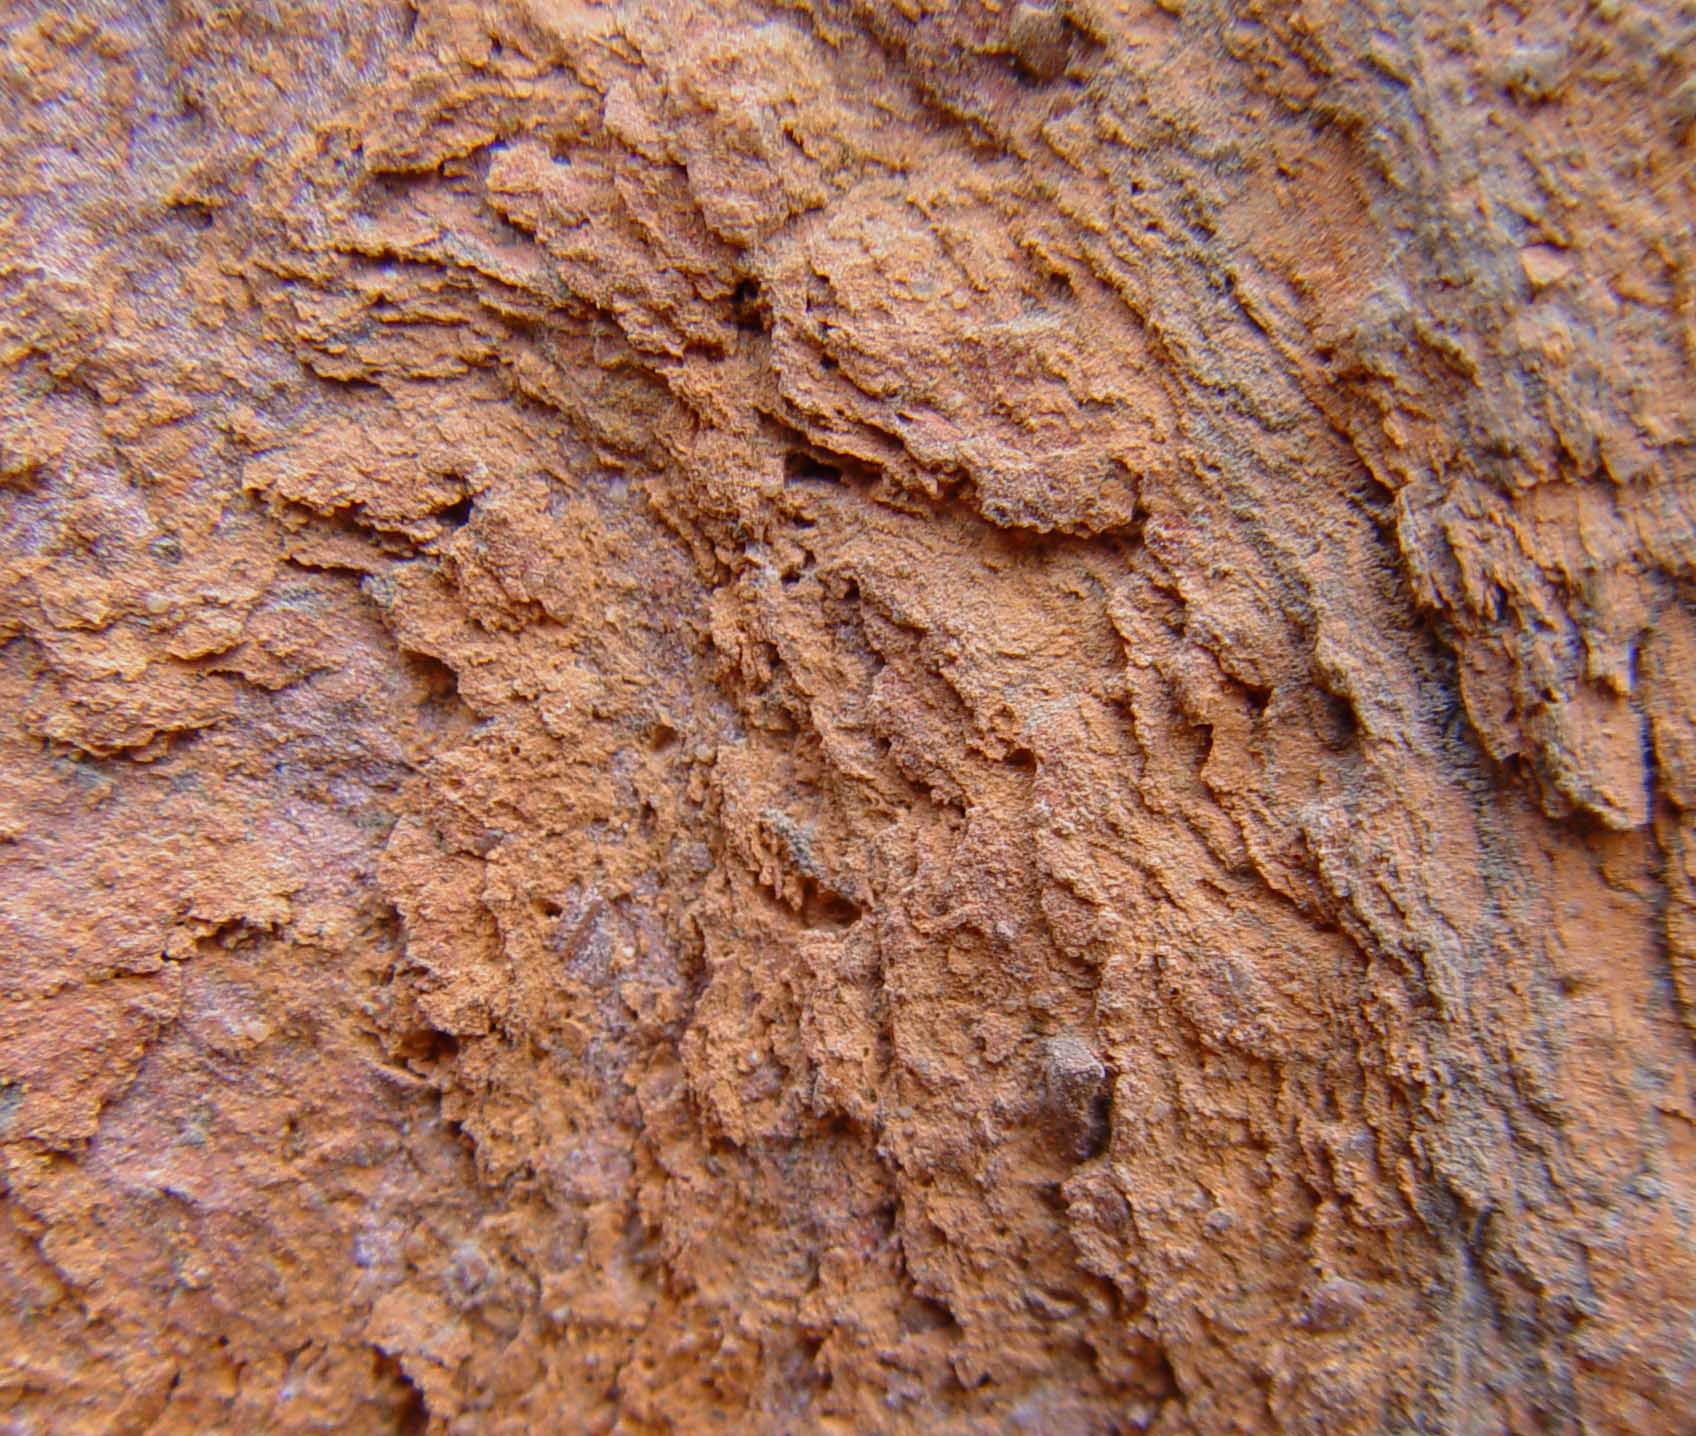 Figure 1: The damaged brick shows a scaly surface, which was caused by crystallizing salts.